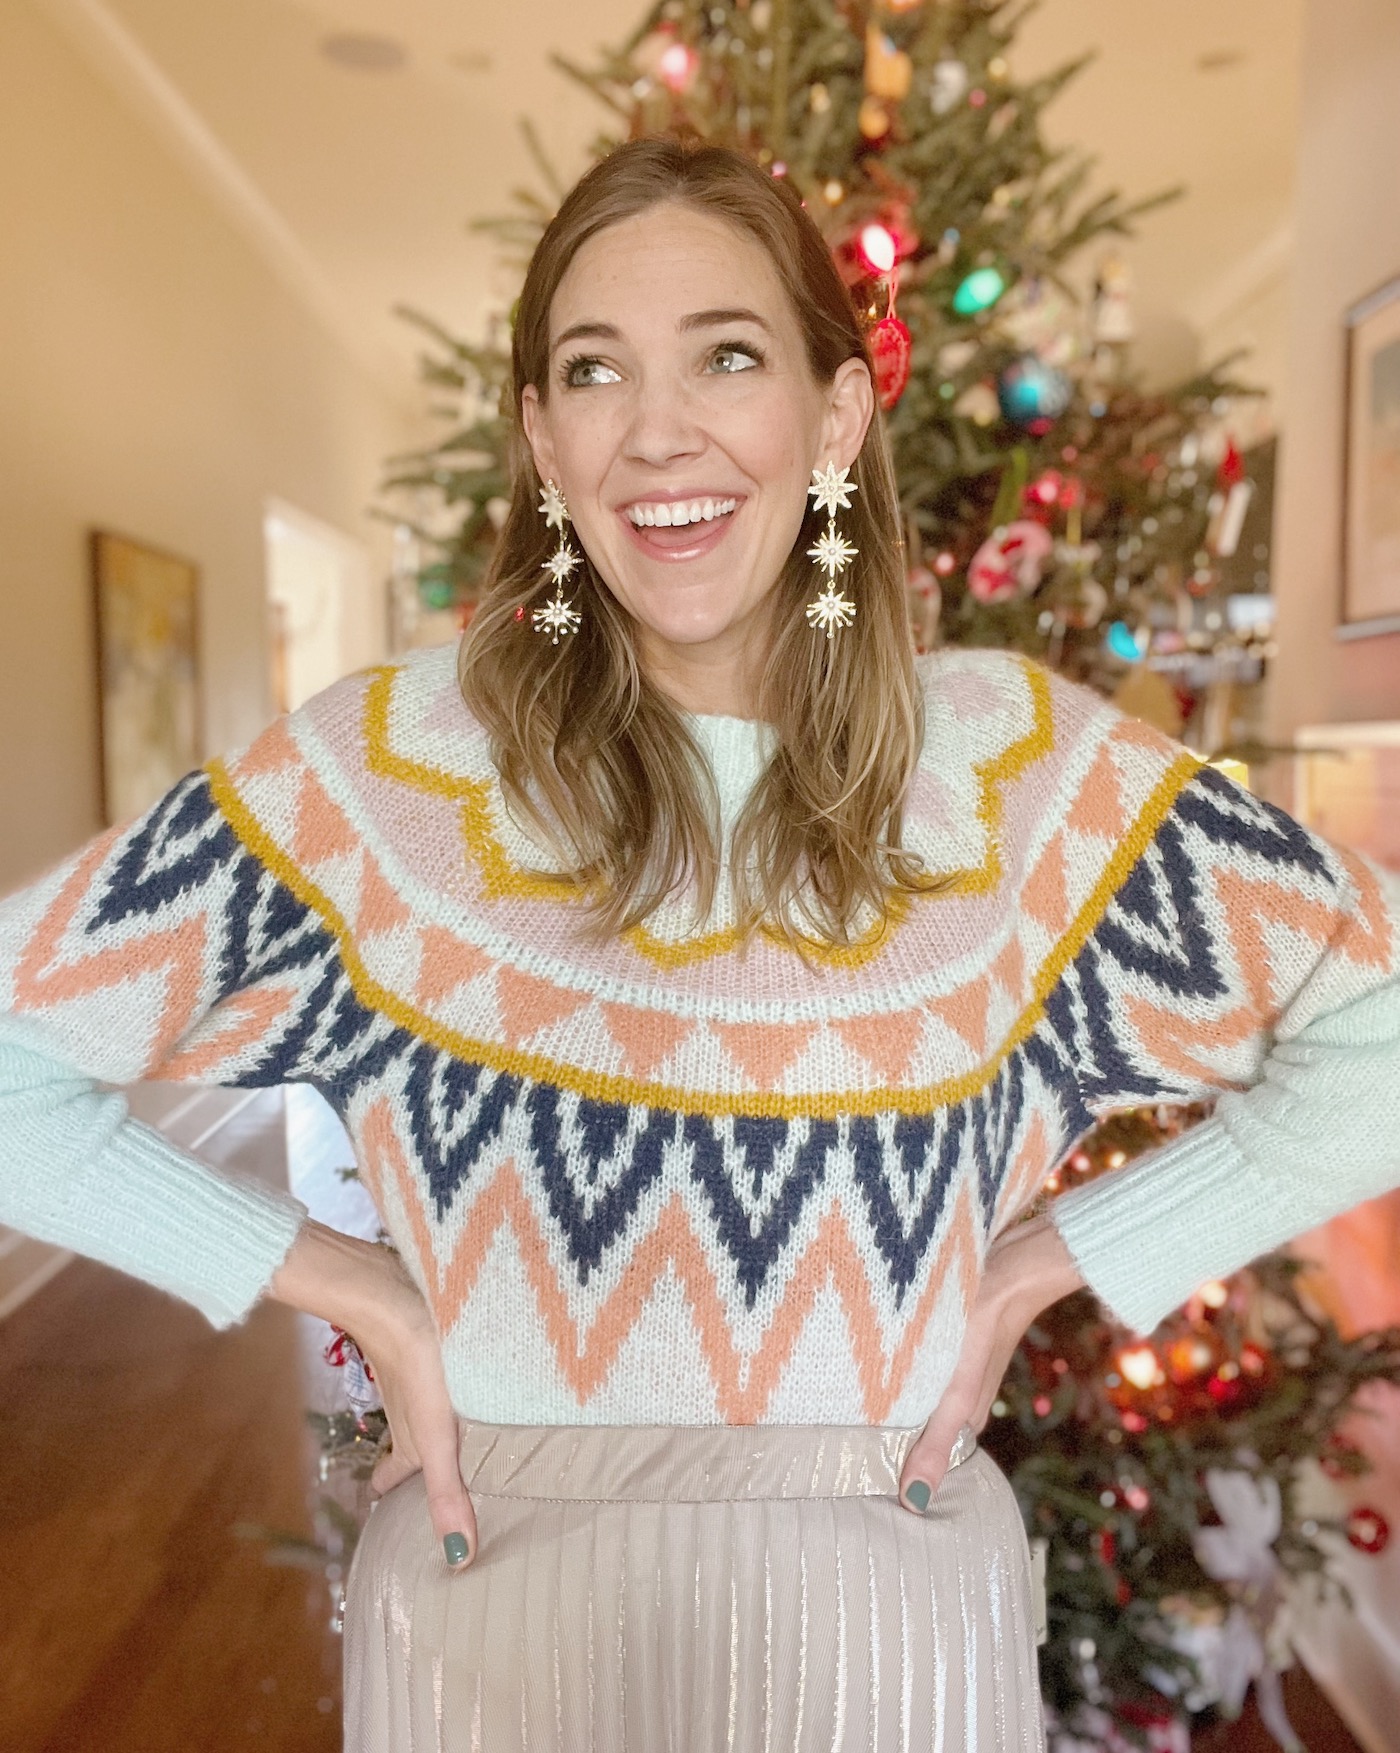 Fair and BRIGHT // affordable and colorful fair isle women's sweaters